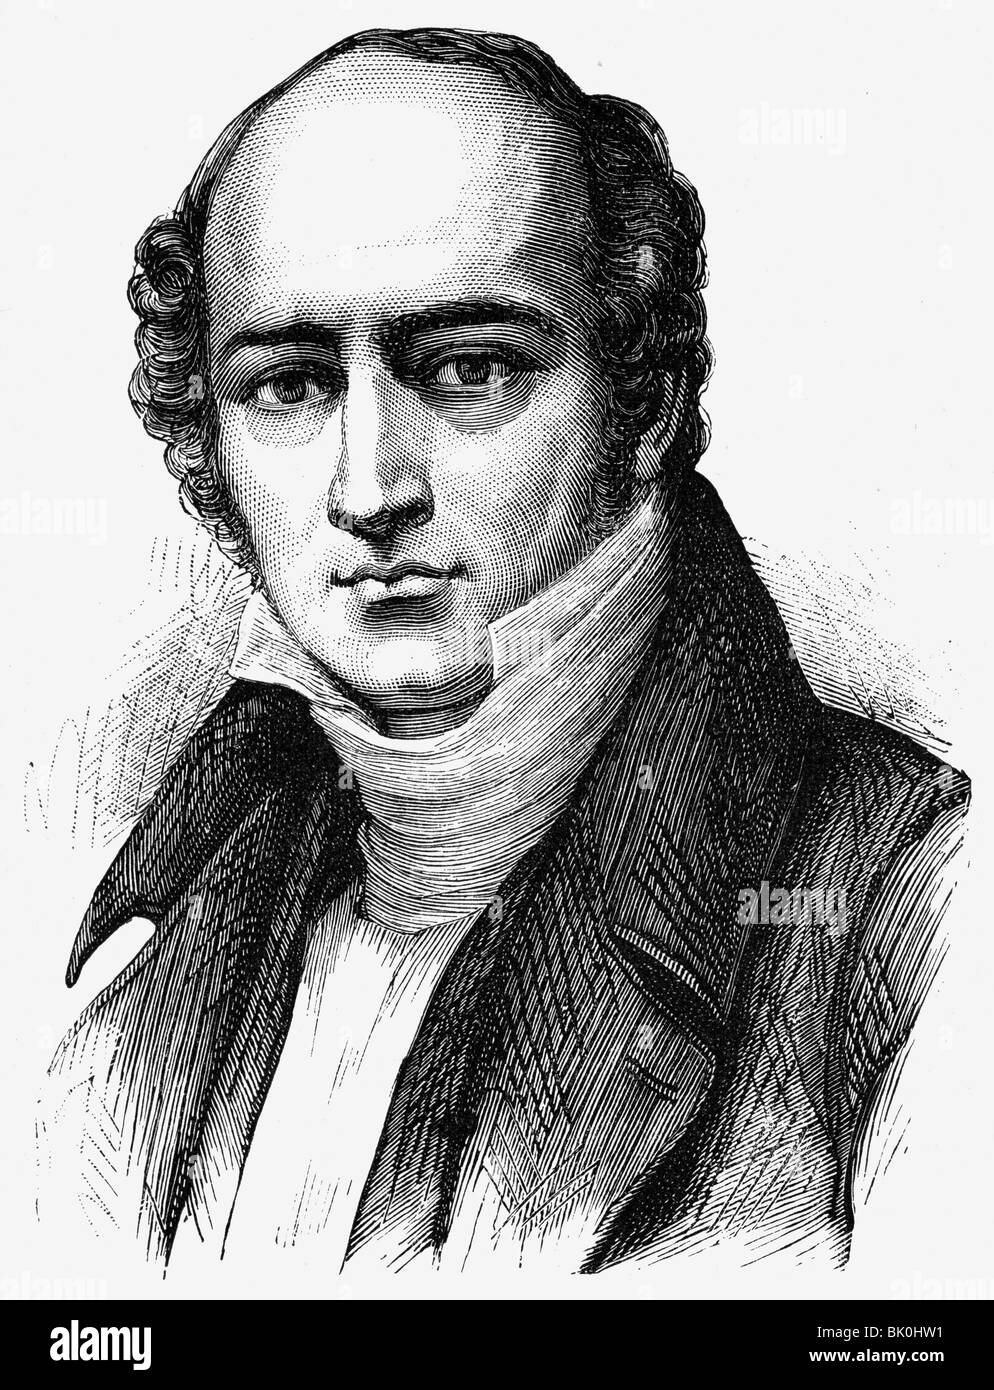 Barrot, Odilon, 19.7.1791 - 6.8.1873, French politician, Prime Minister 20.2.1848 - 31.12.1849, portrait, wood engraving, 19th century, , Stock Photo